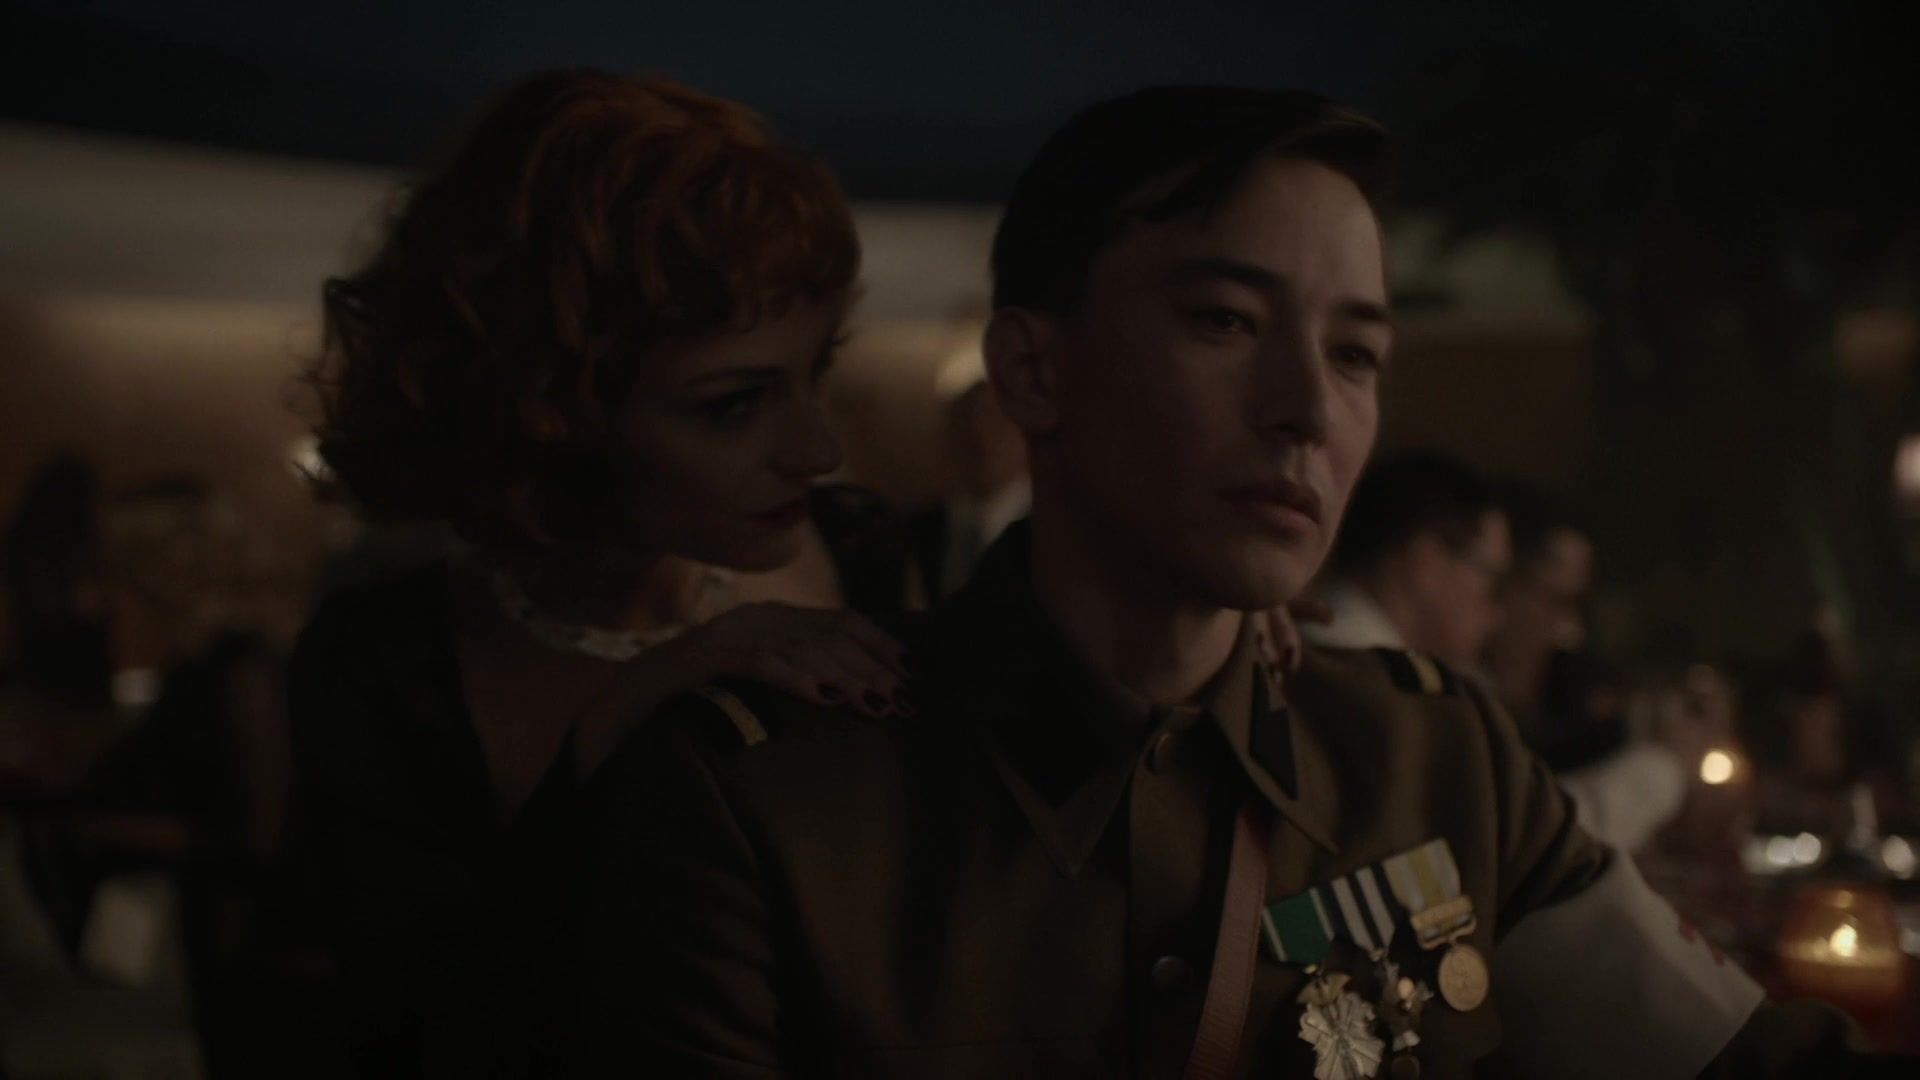 Pissing Nude Destiny Millns - The Man in the High Castle s04e03 (2019) Naked